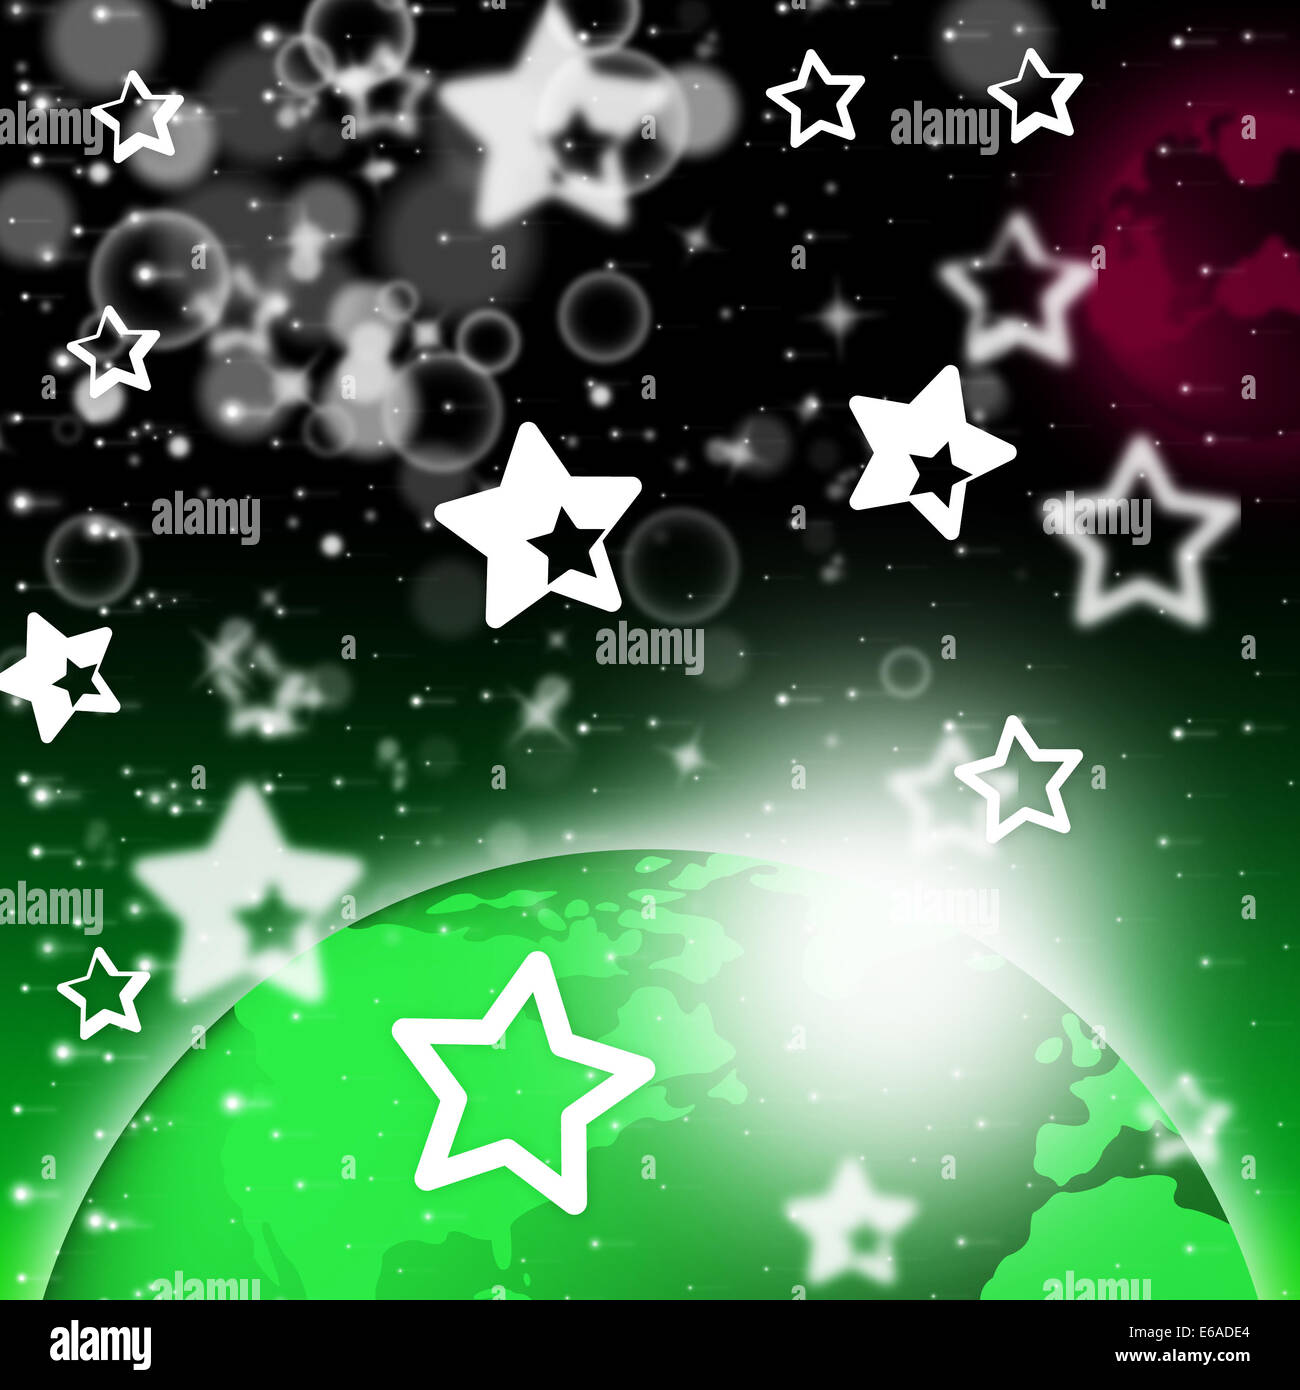 Green Planet Background Showing Stars And Celestial Bodies Stock Photo